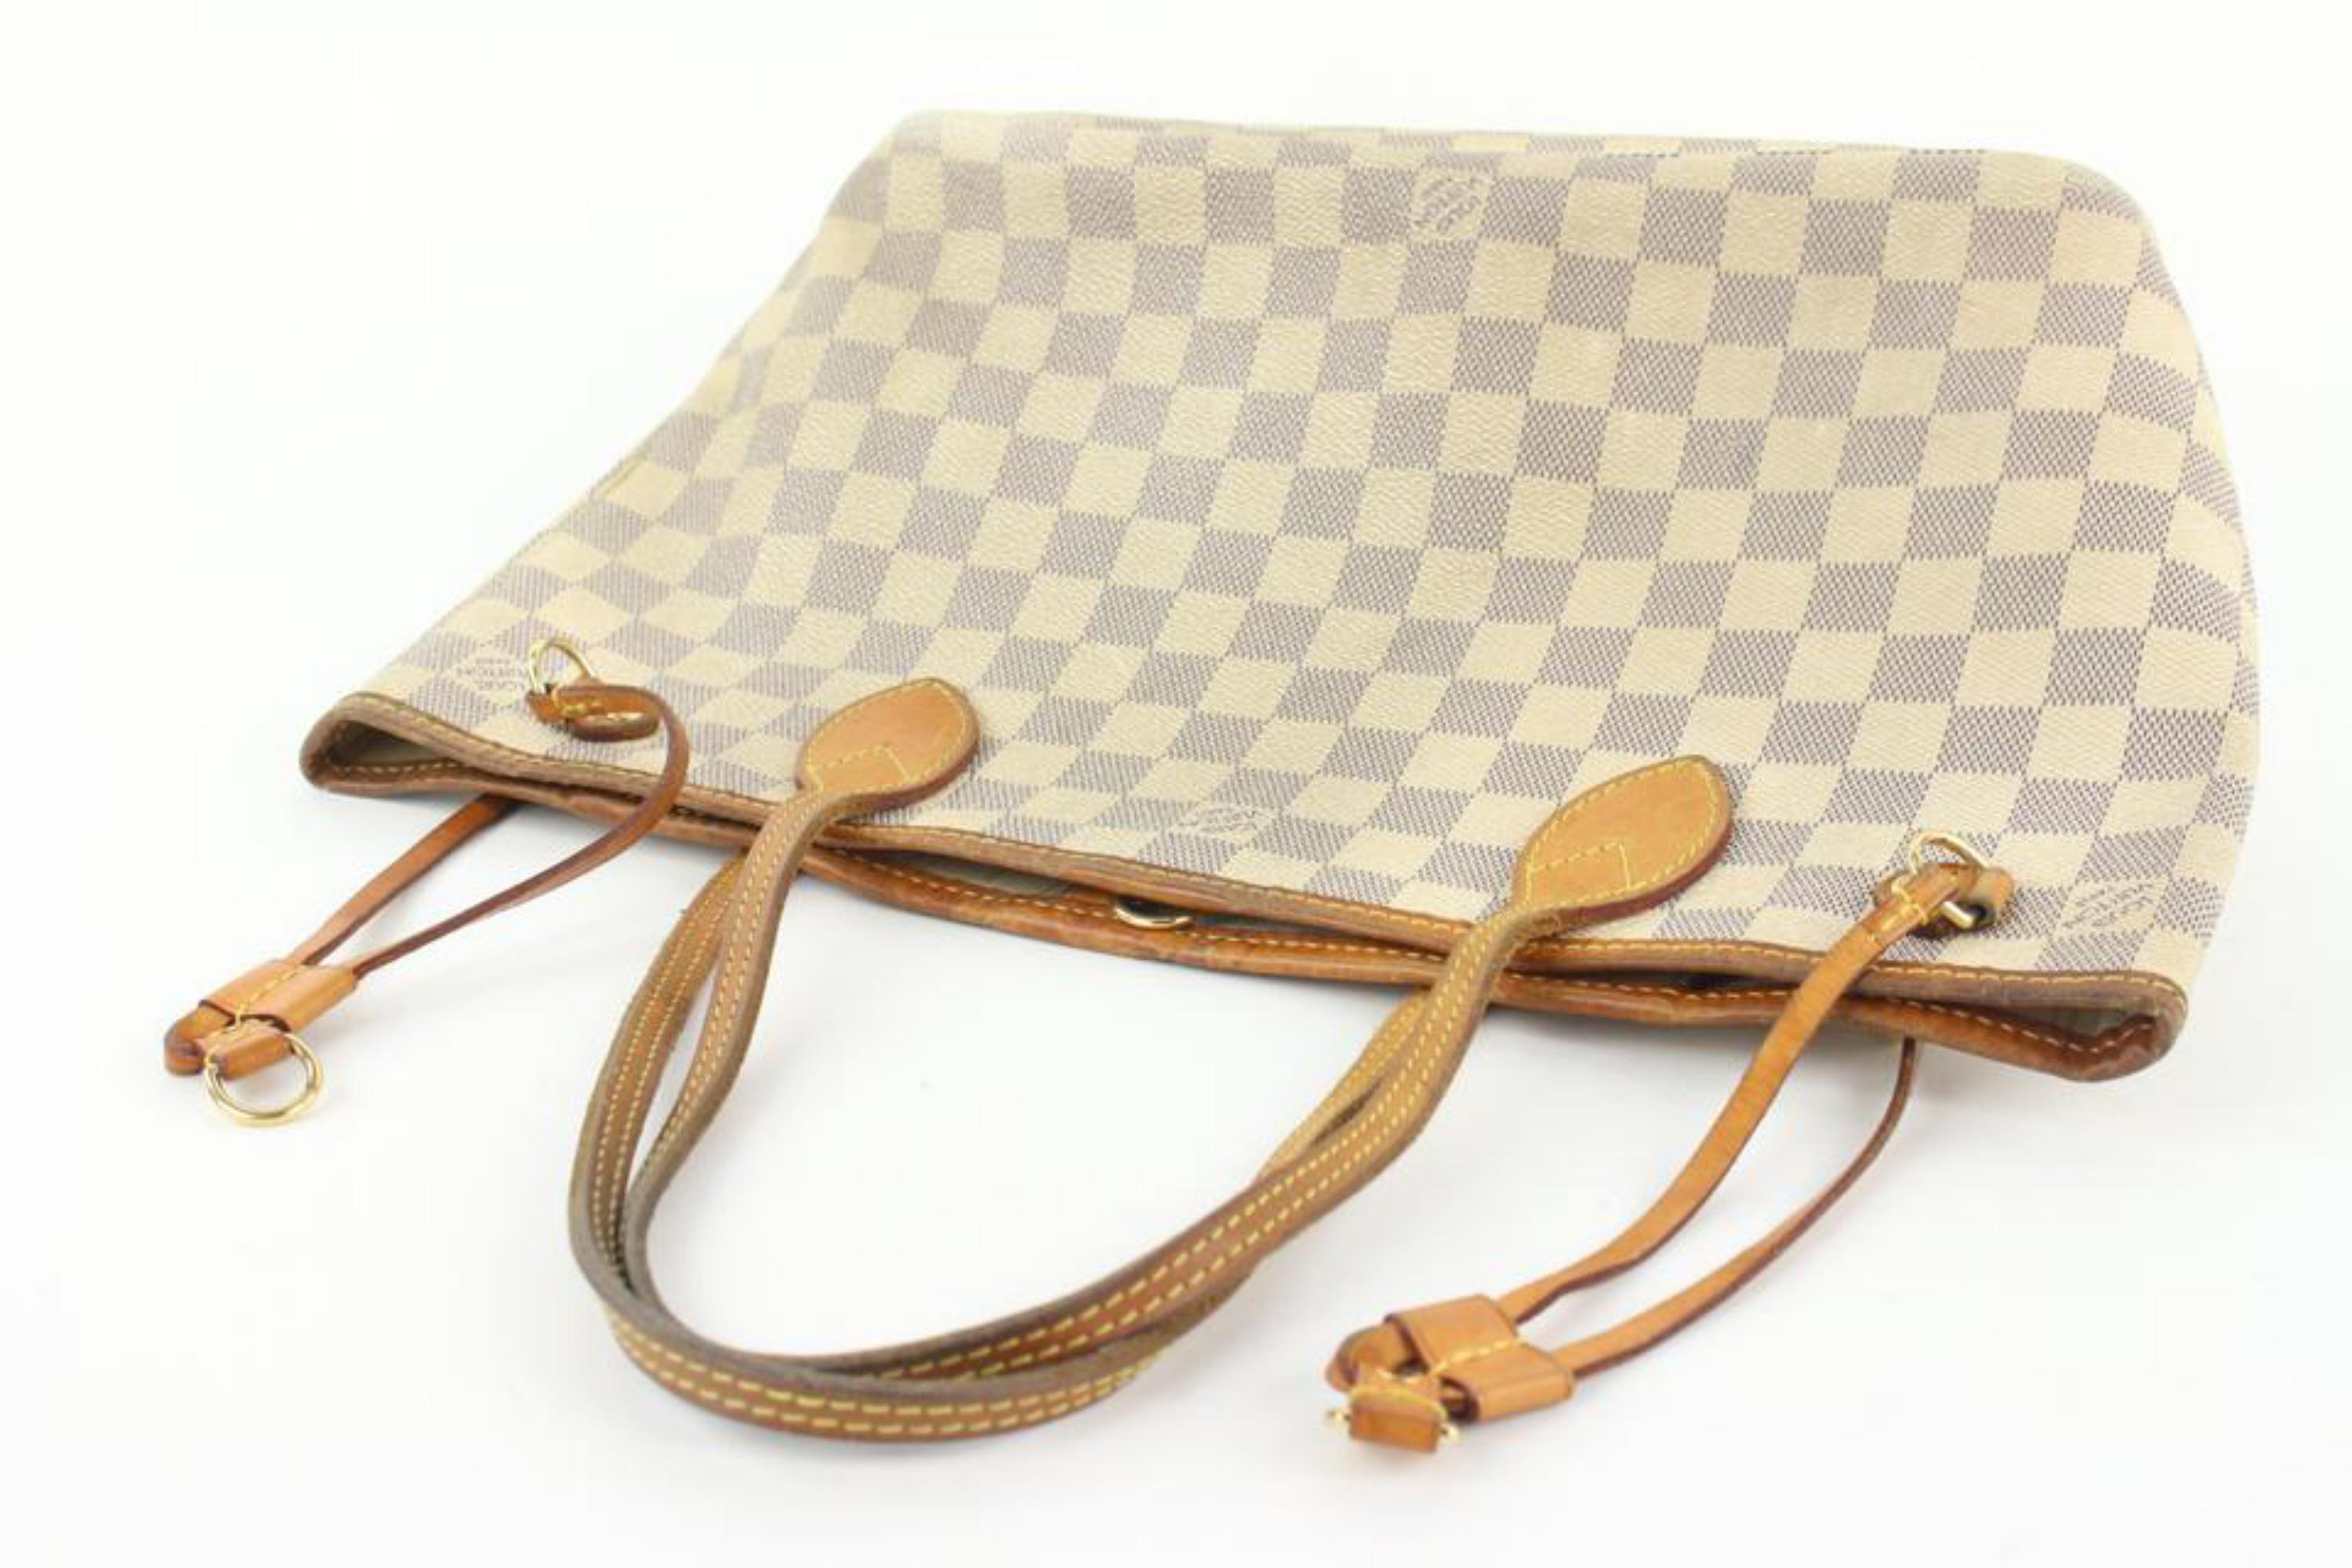 Louis Vuitton Small Damier Azur Neverfull PM Tote Bag 1lv53a In Fair Condition For Sale In Dix hills, NY